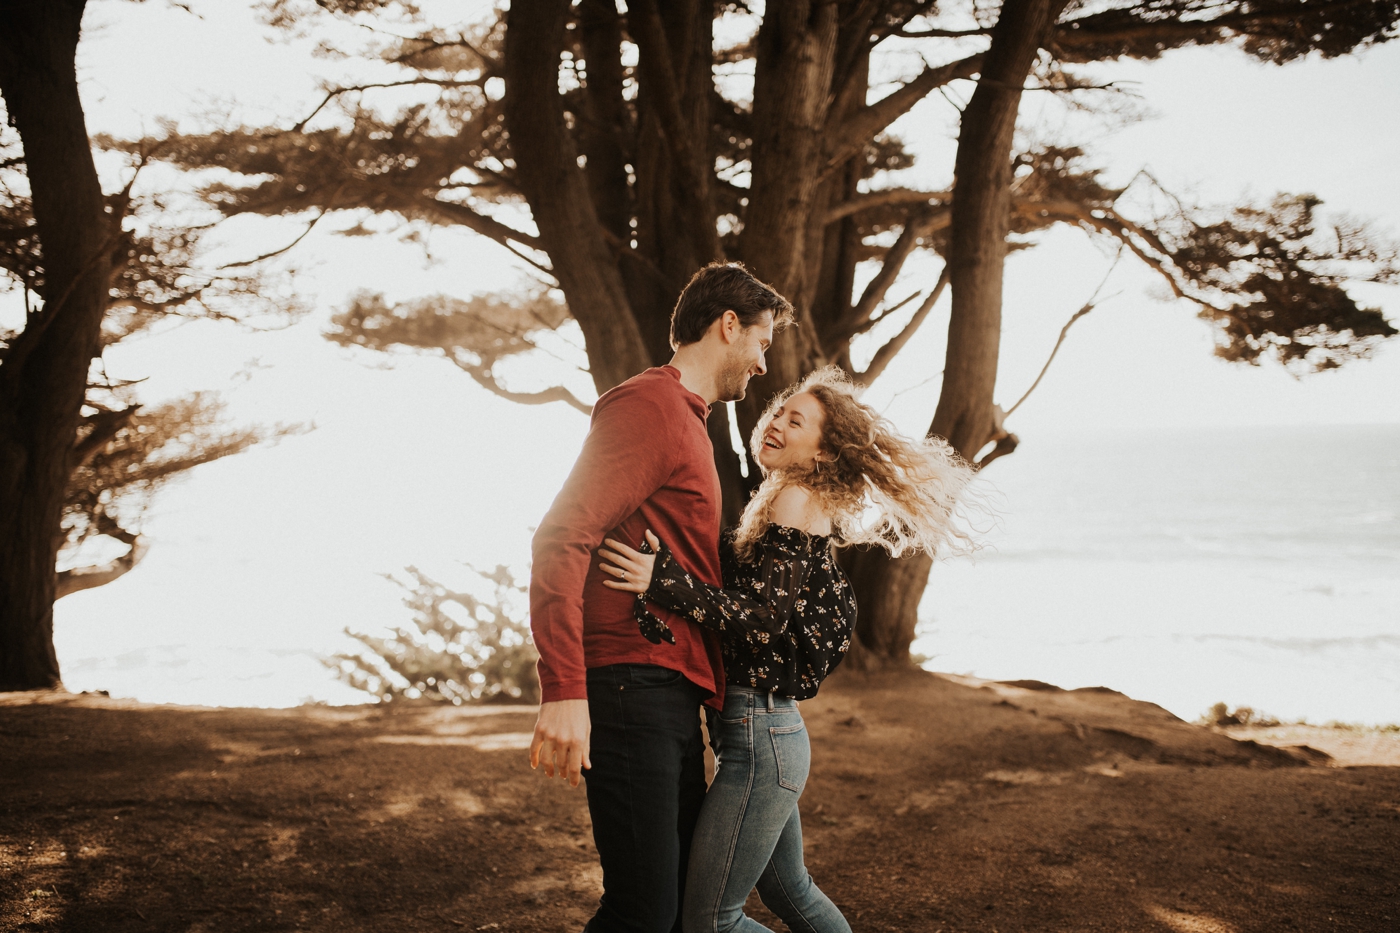 Sunset beach engagement session in Half Moon Bay, California